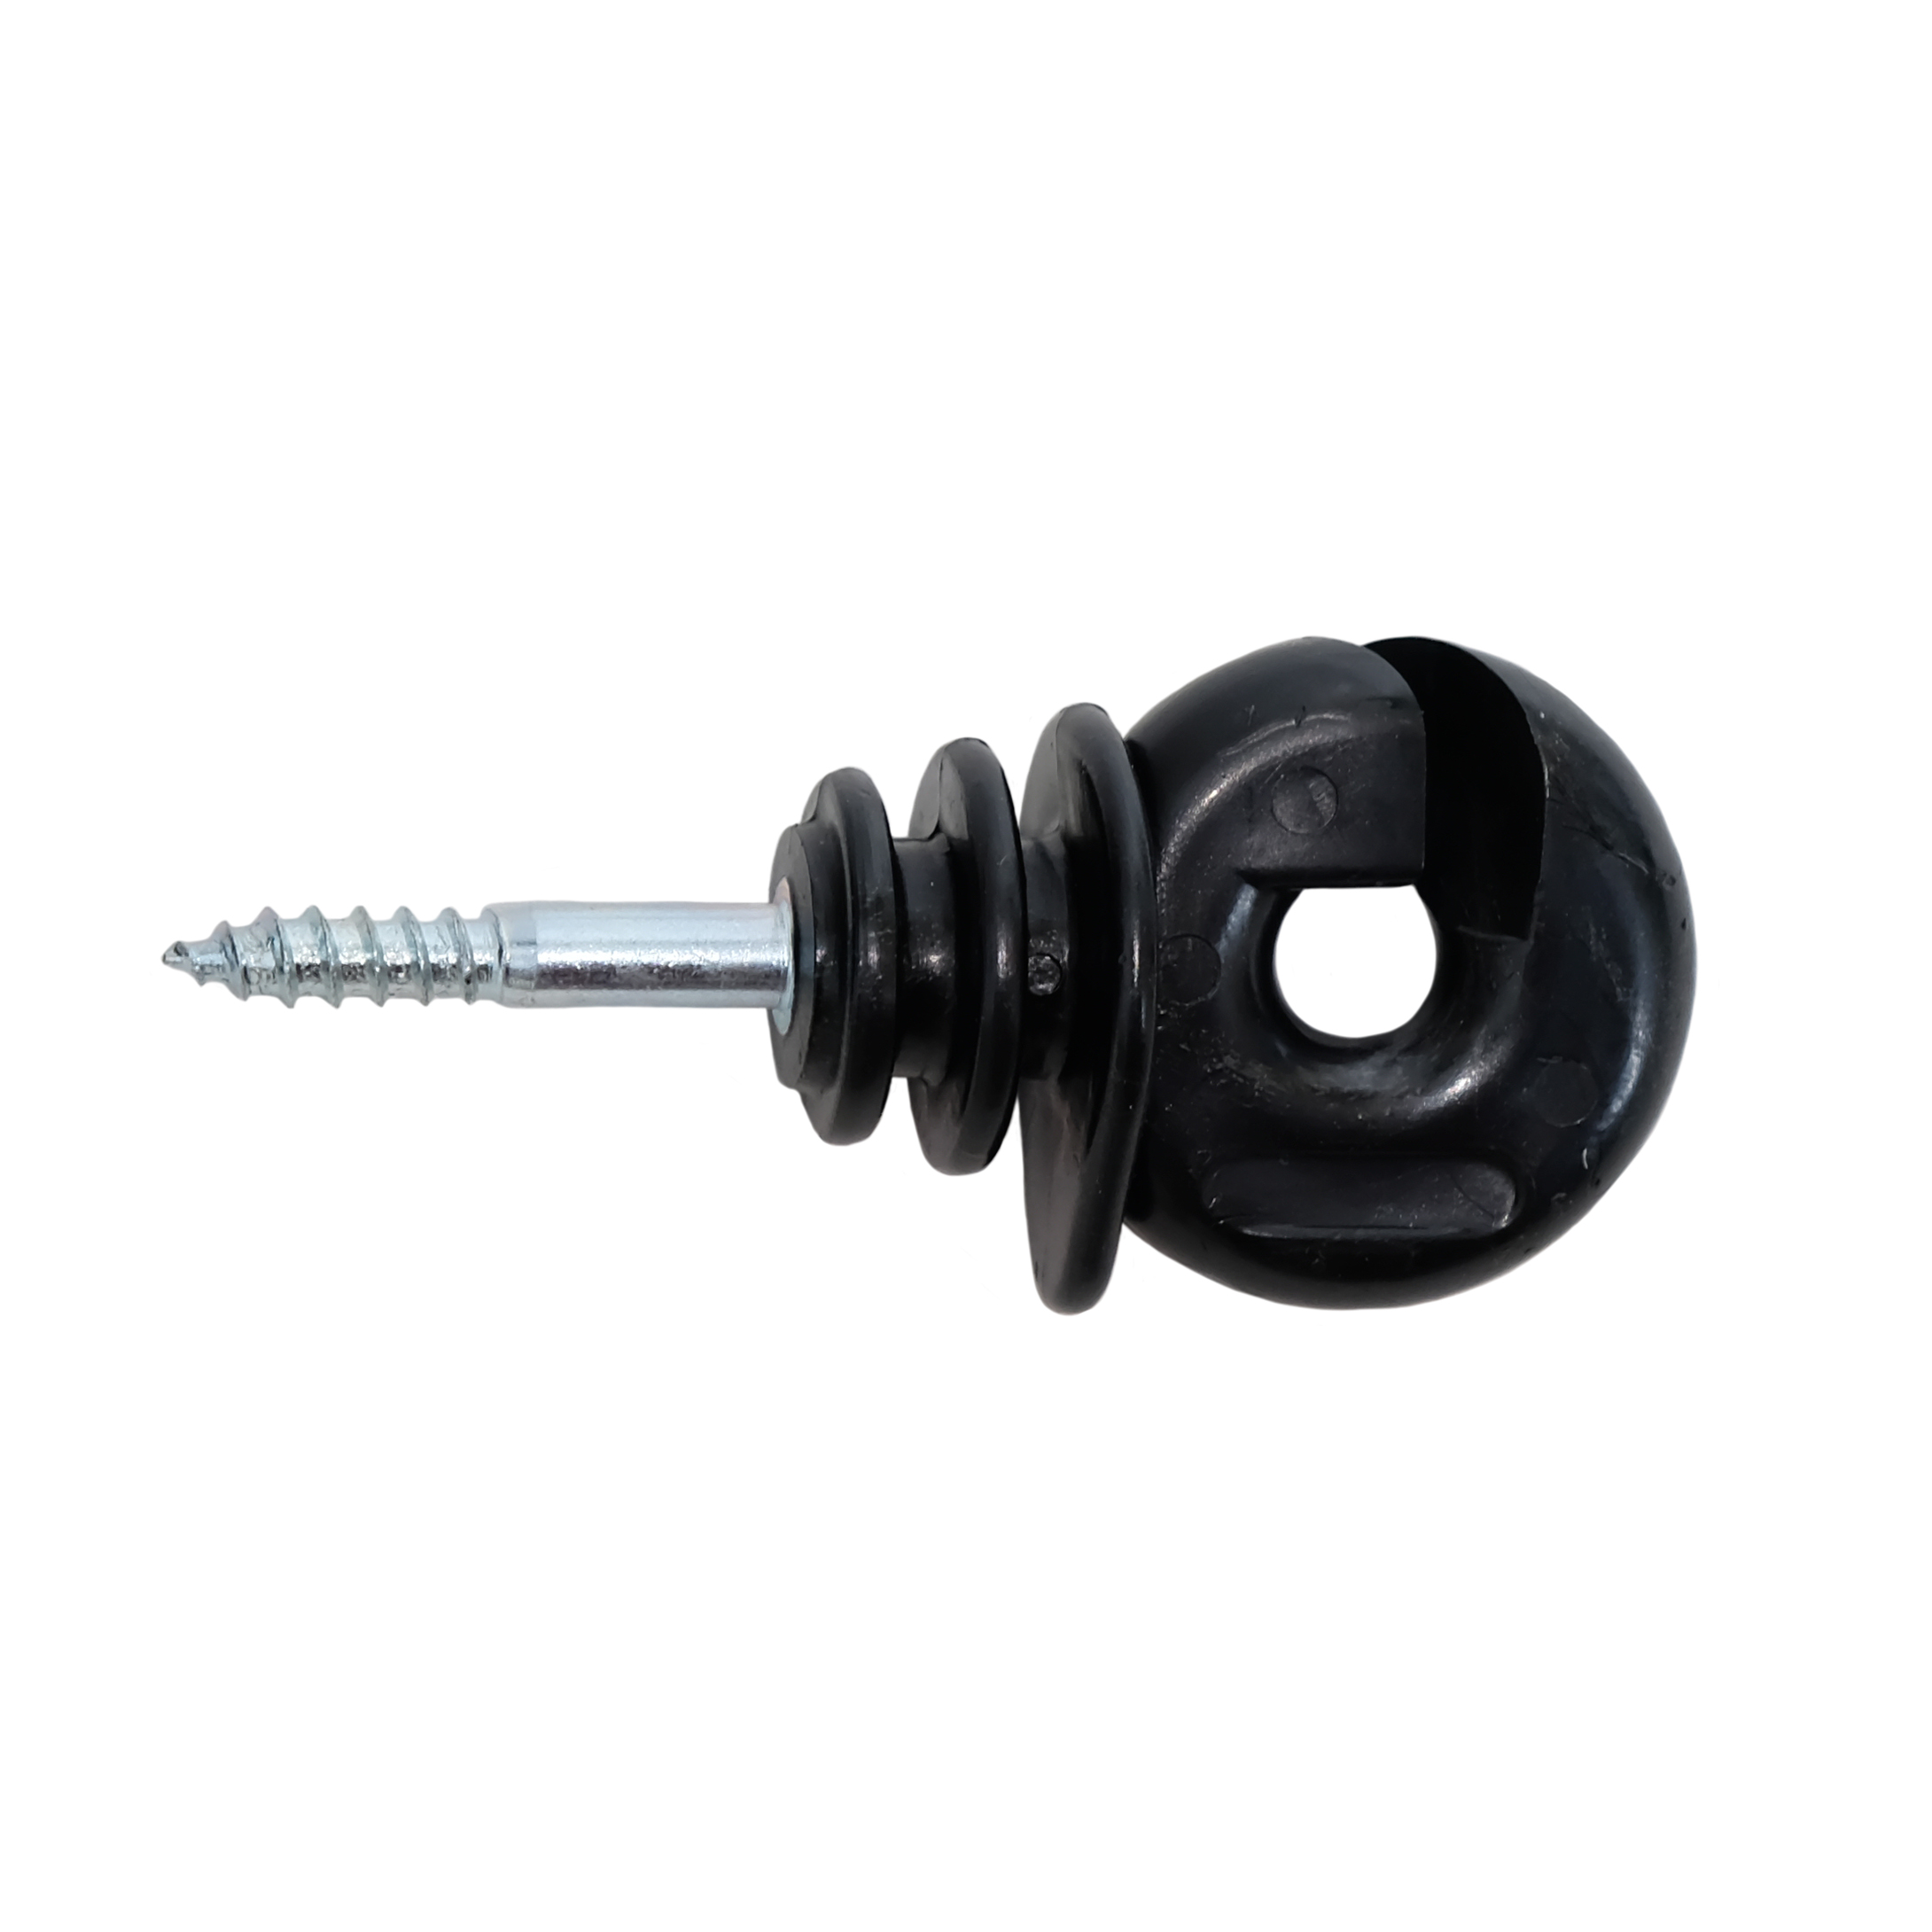 Electric Fence Screw in Ring Insulators 25 pack. 